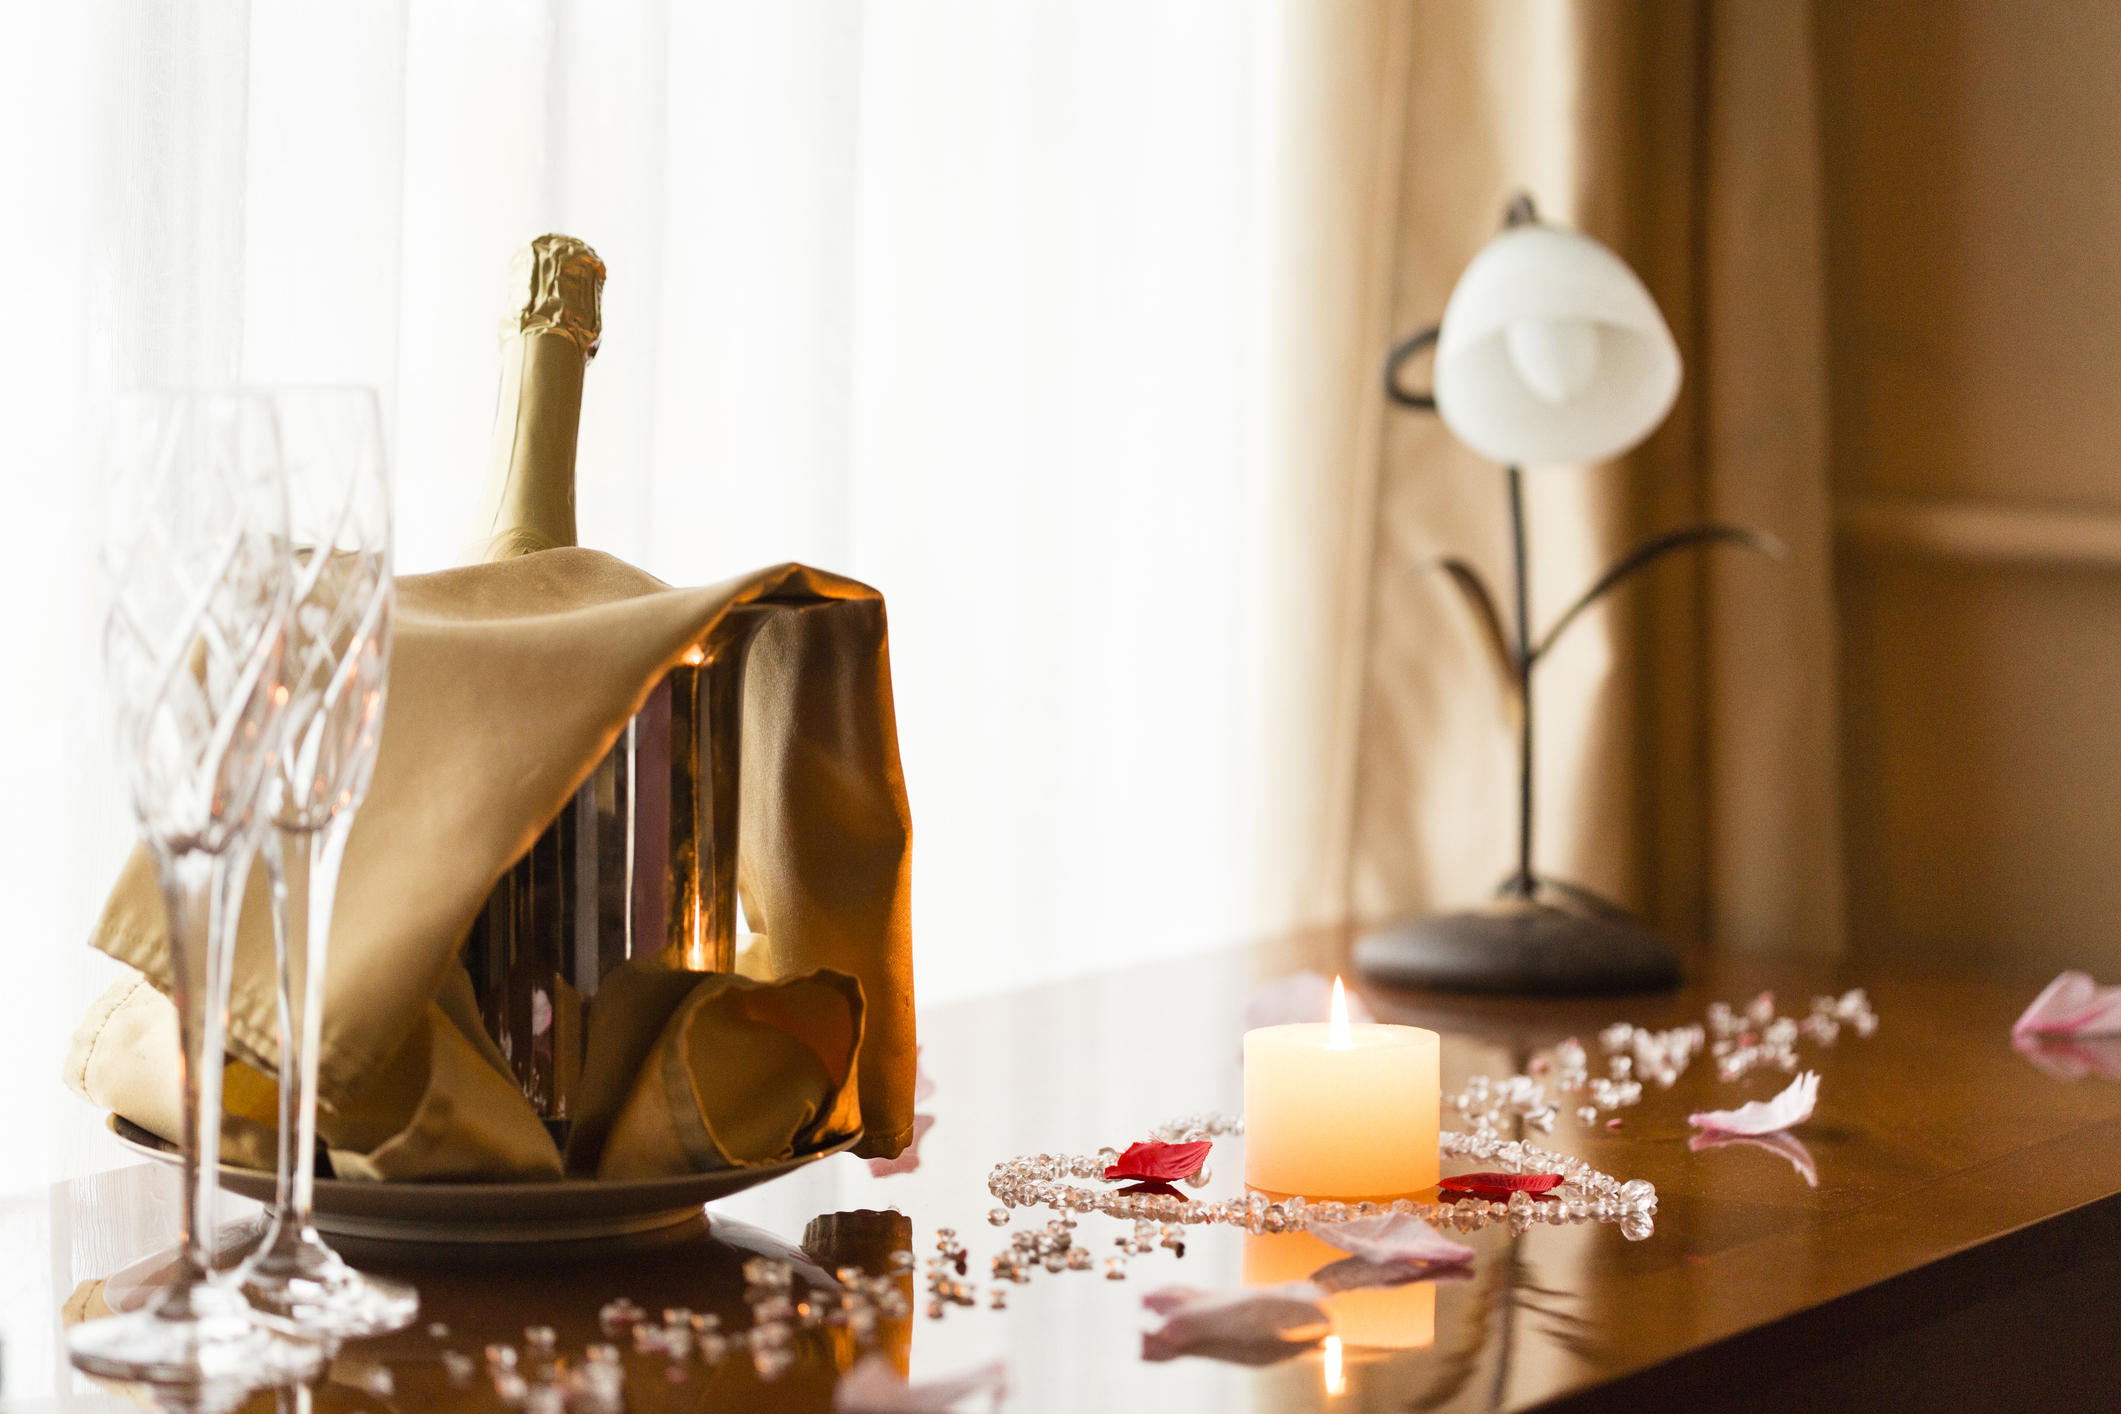 Champagne bottle in gold wrapper on table with two glasses, candle, and rose petals for a wedding setting